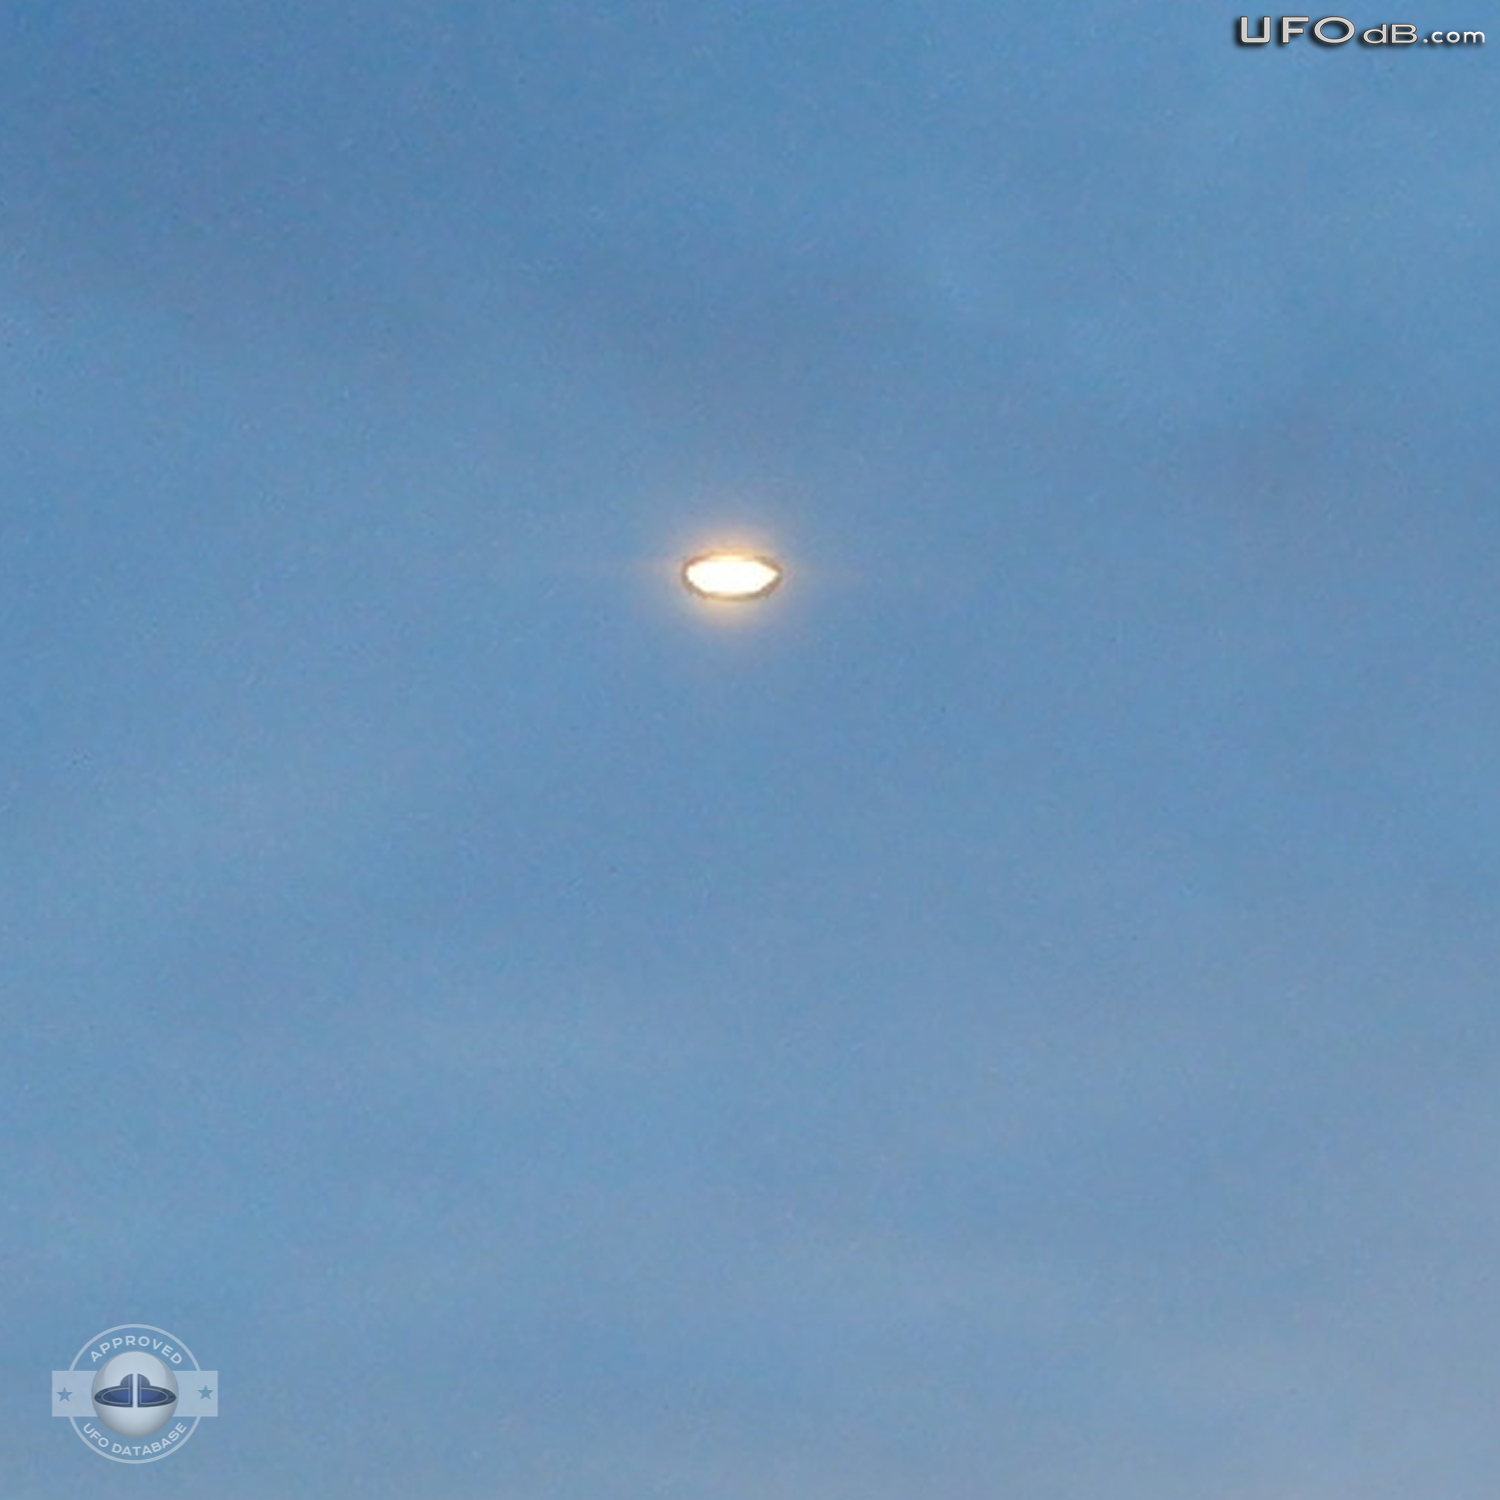 Darting UFO photographed from moving car | Bryncethin, Wales, UK 2011 UFO Picture #275-3